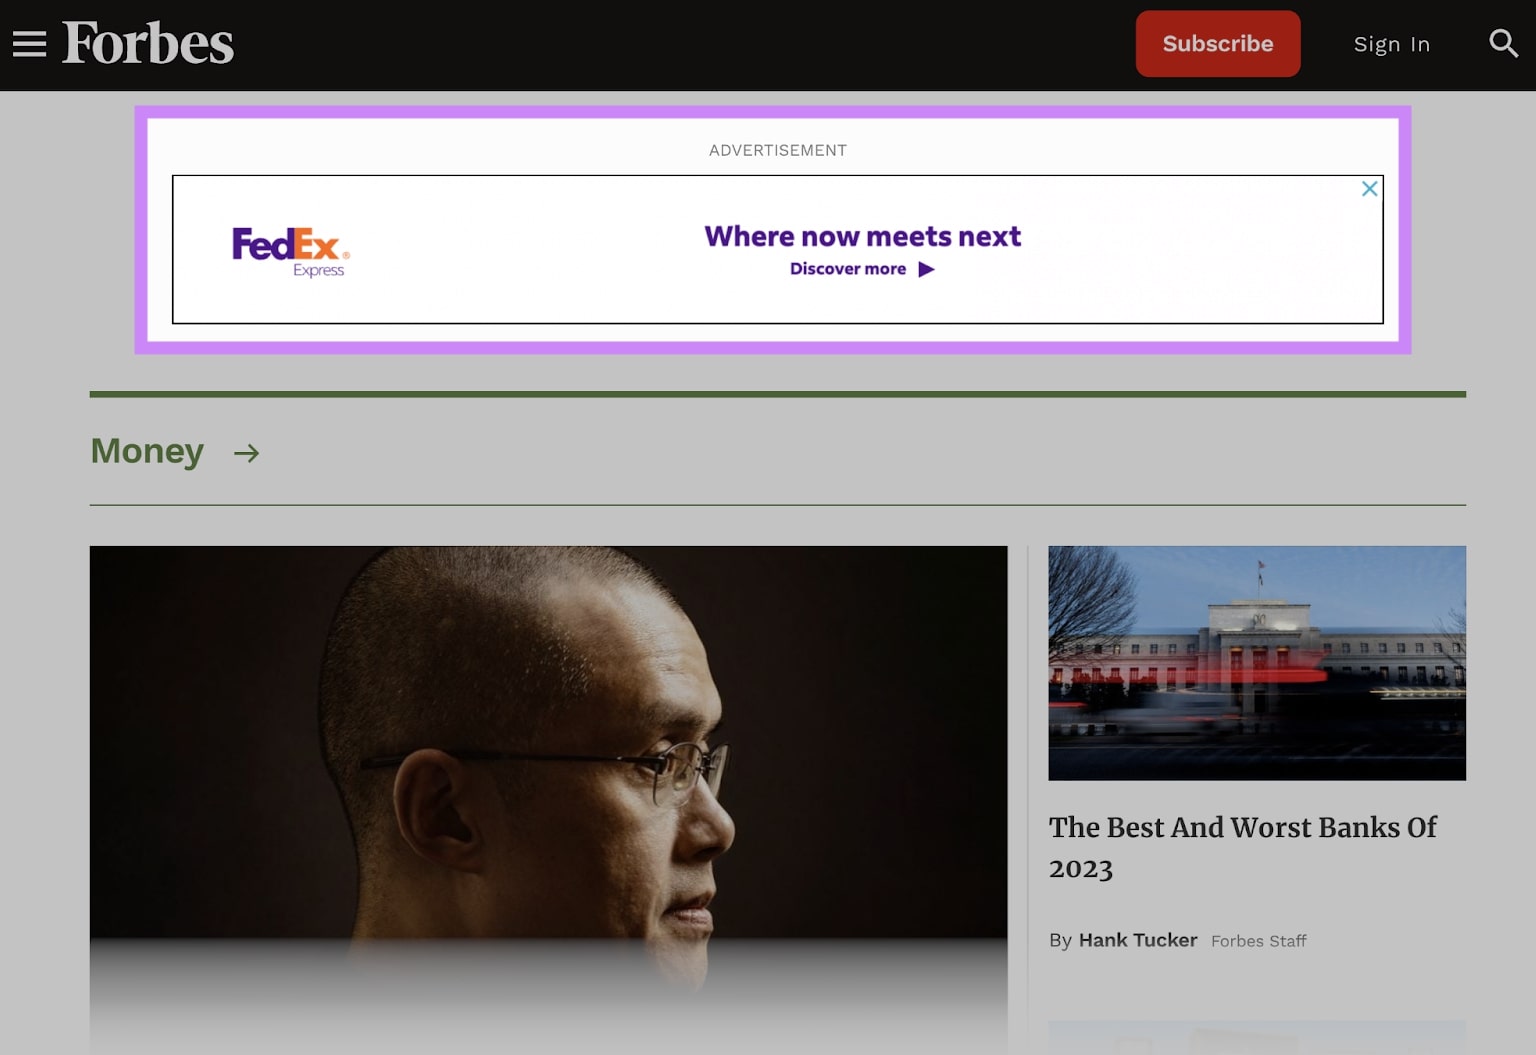 A display ad for FedEx on Forbes's website